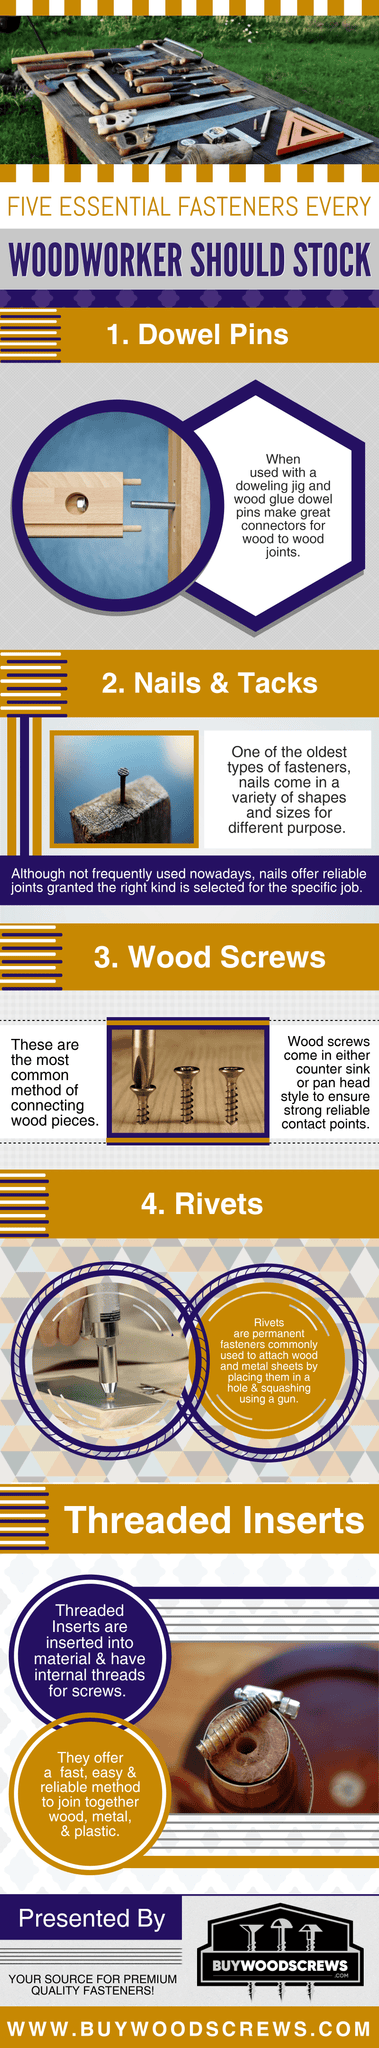 Five Essential Fasteners Every Woodworker Should Stock